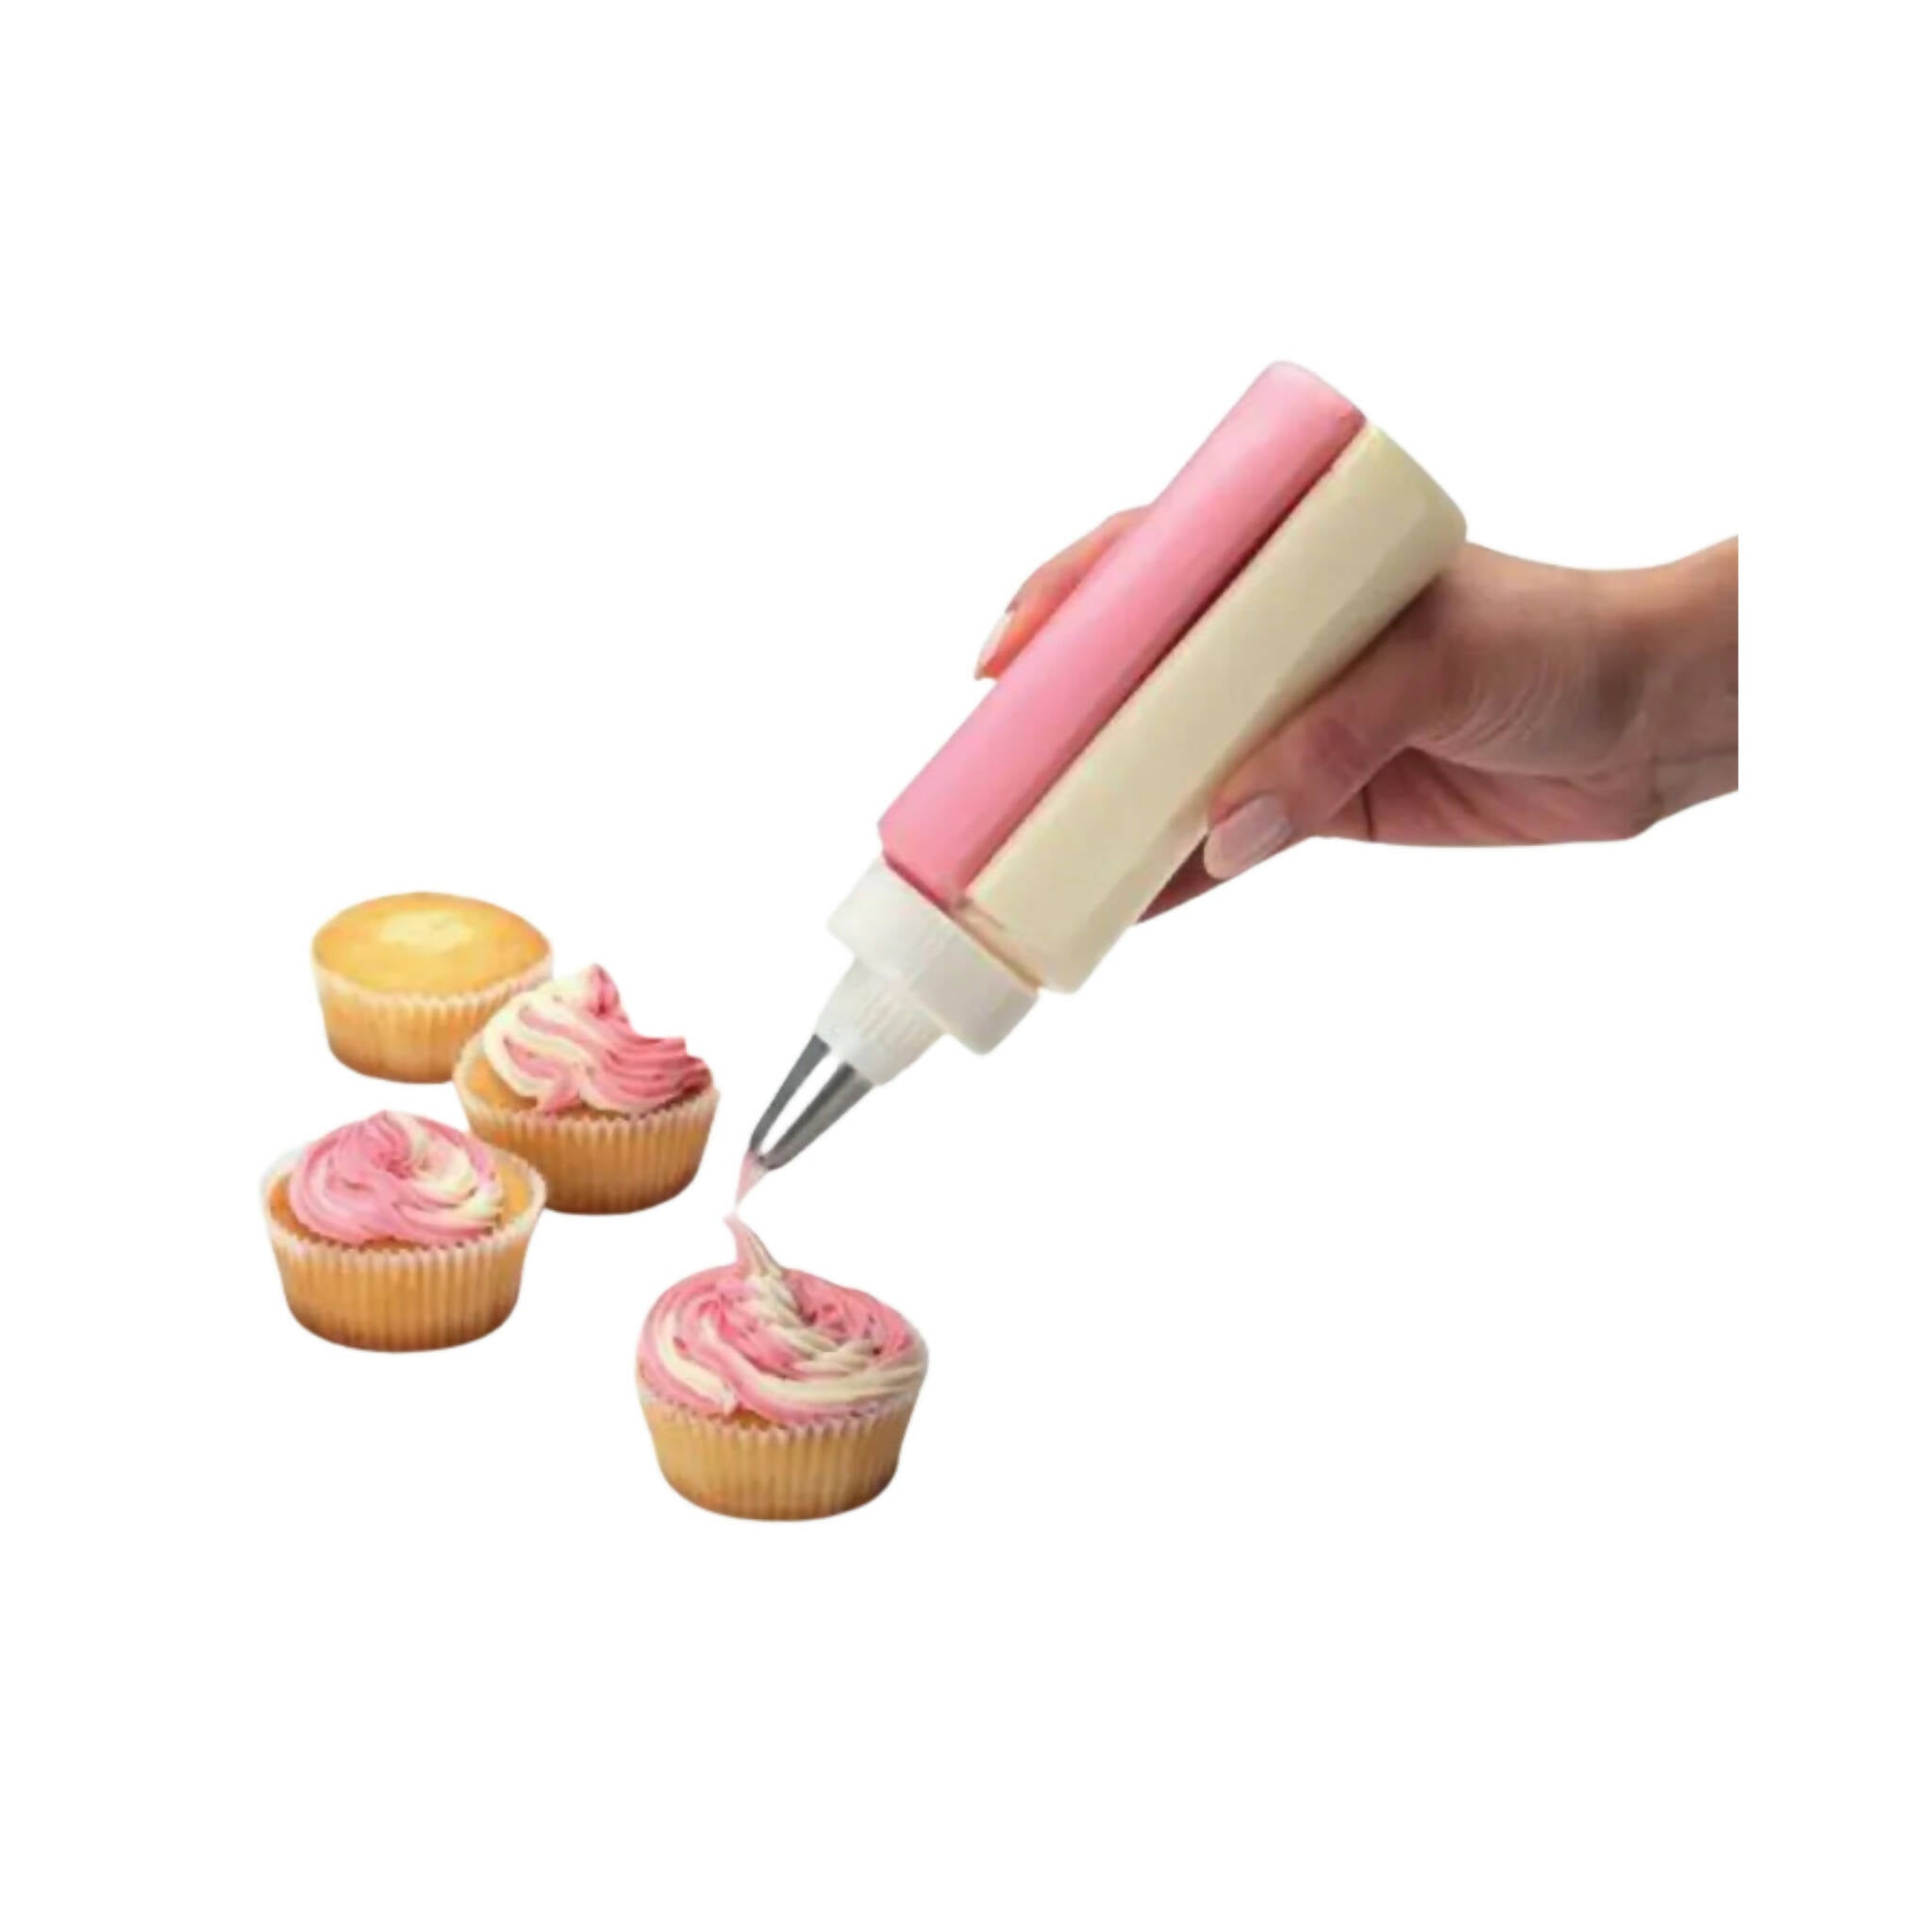 Icing Bottle, Dual-Tone, Baking, Frosting, Decorating made easy!